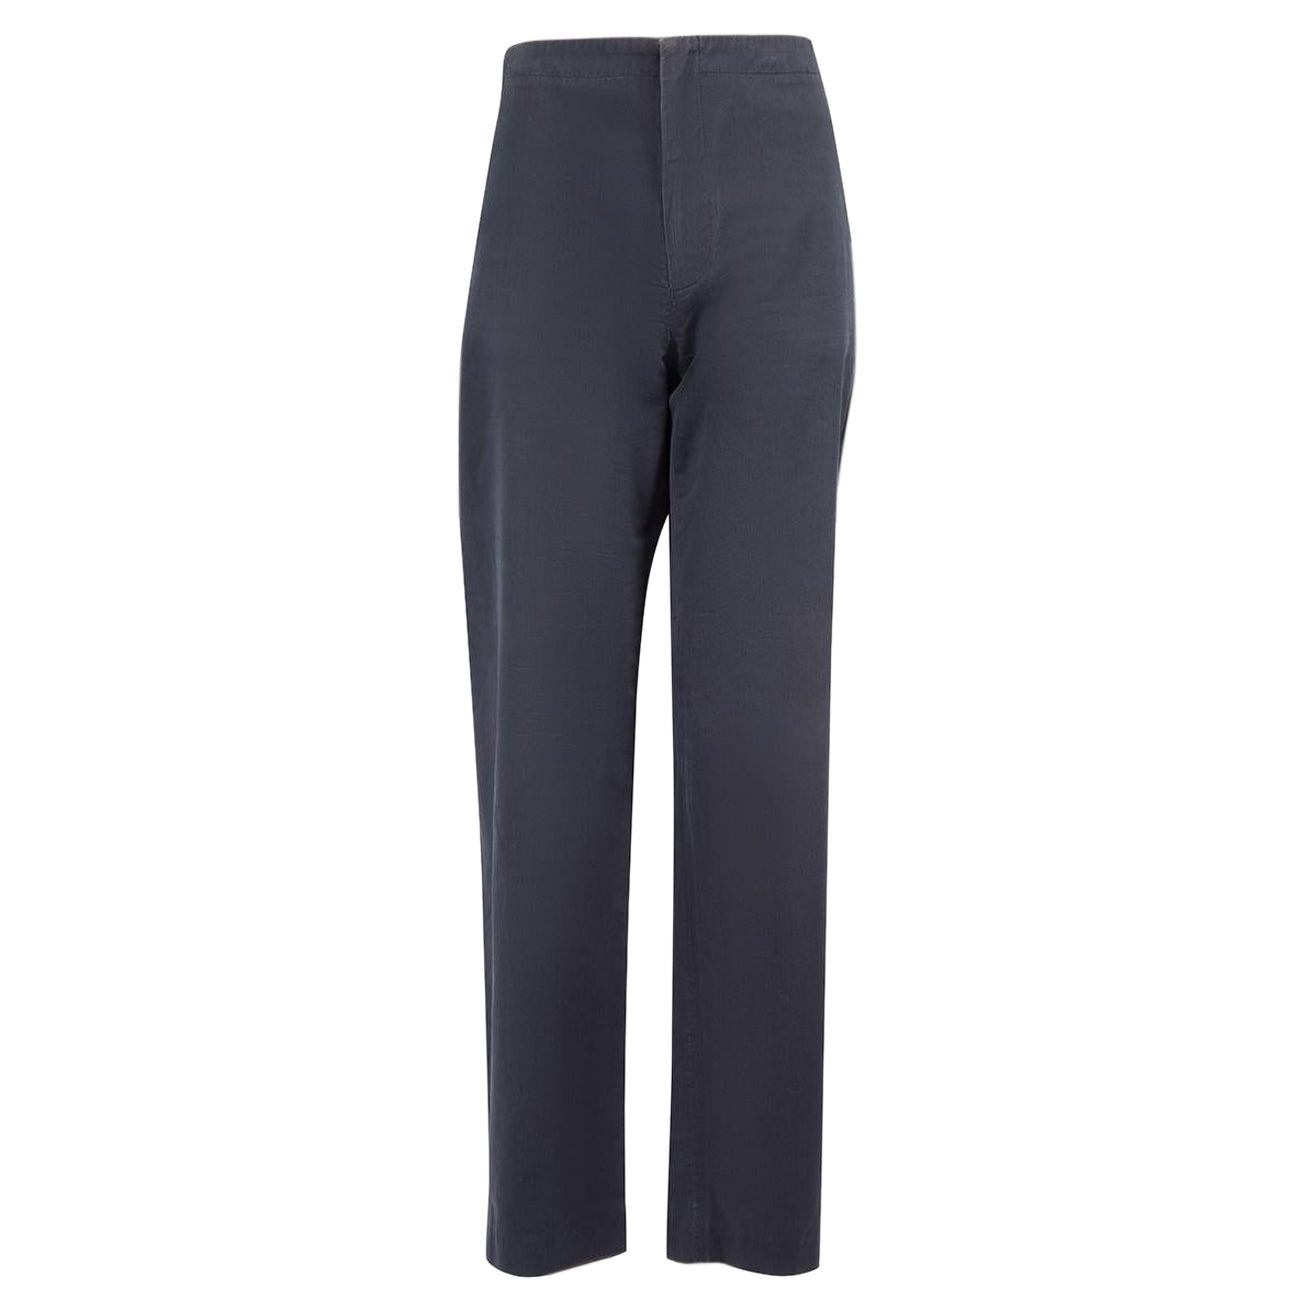 Marni S/S13 Navy Straight Leg Trousers Size L For Sale